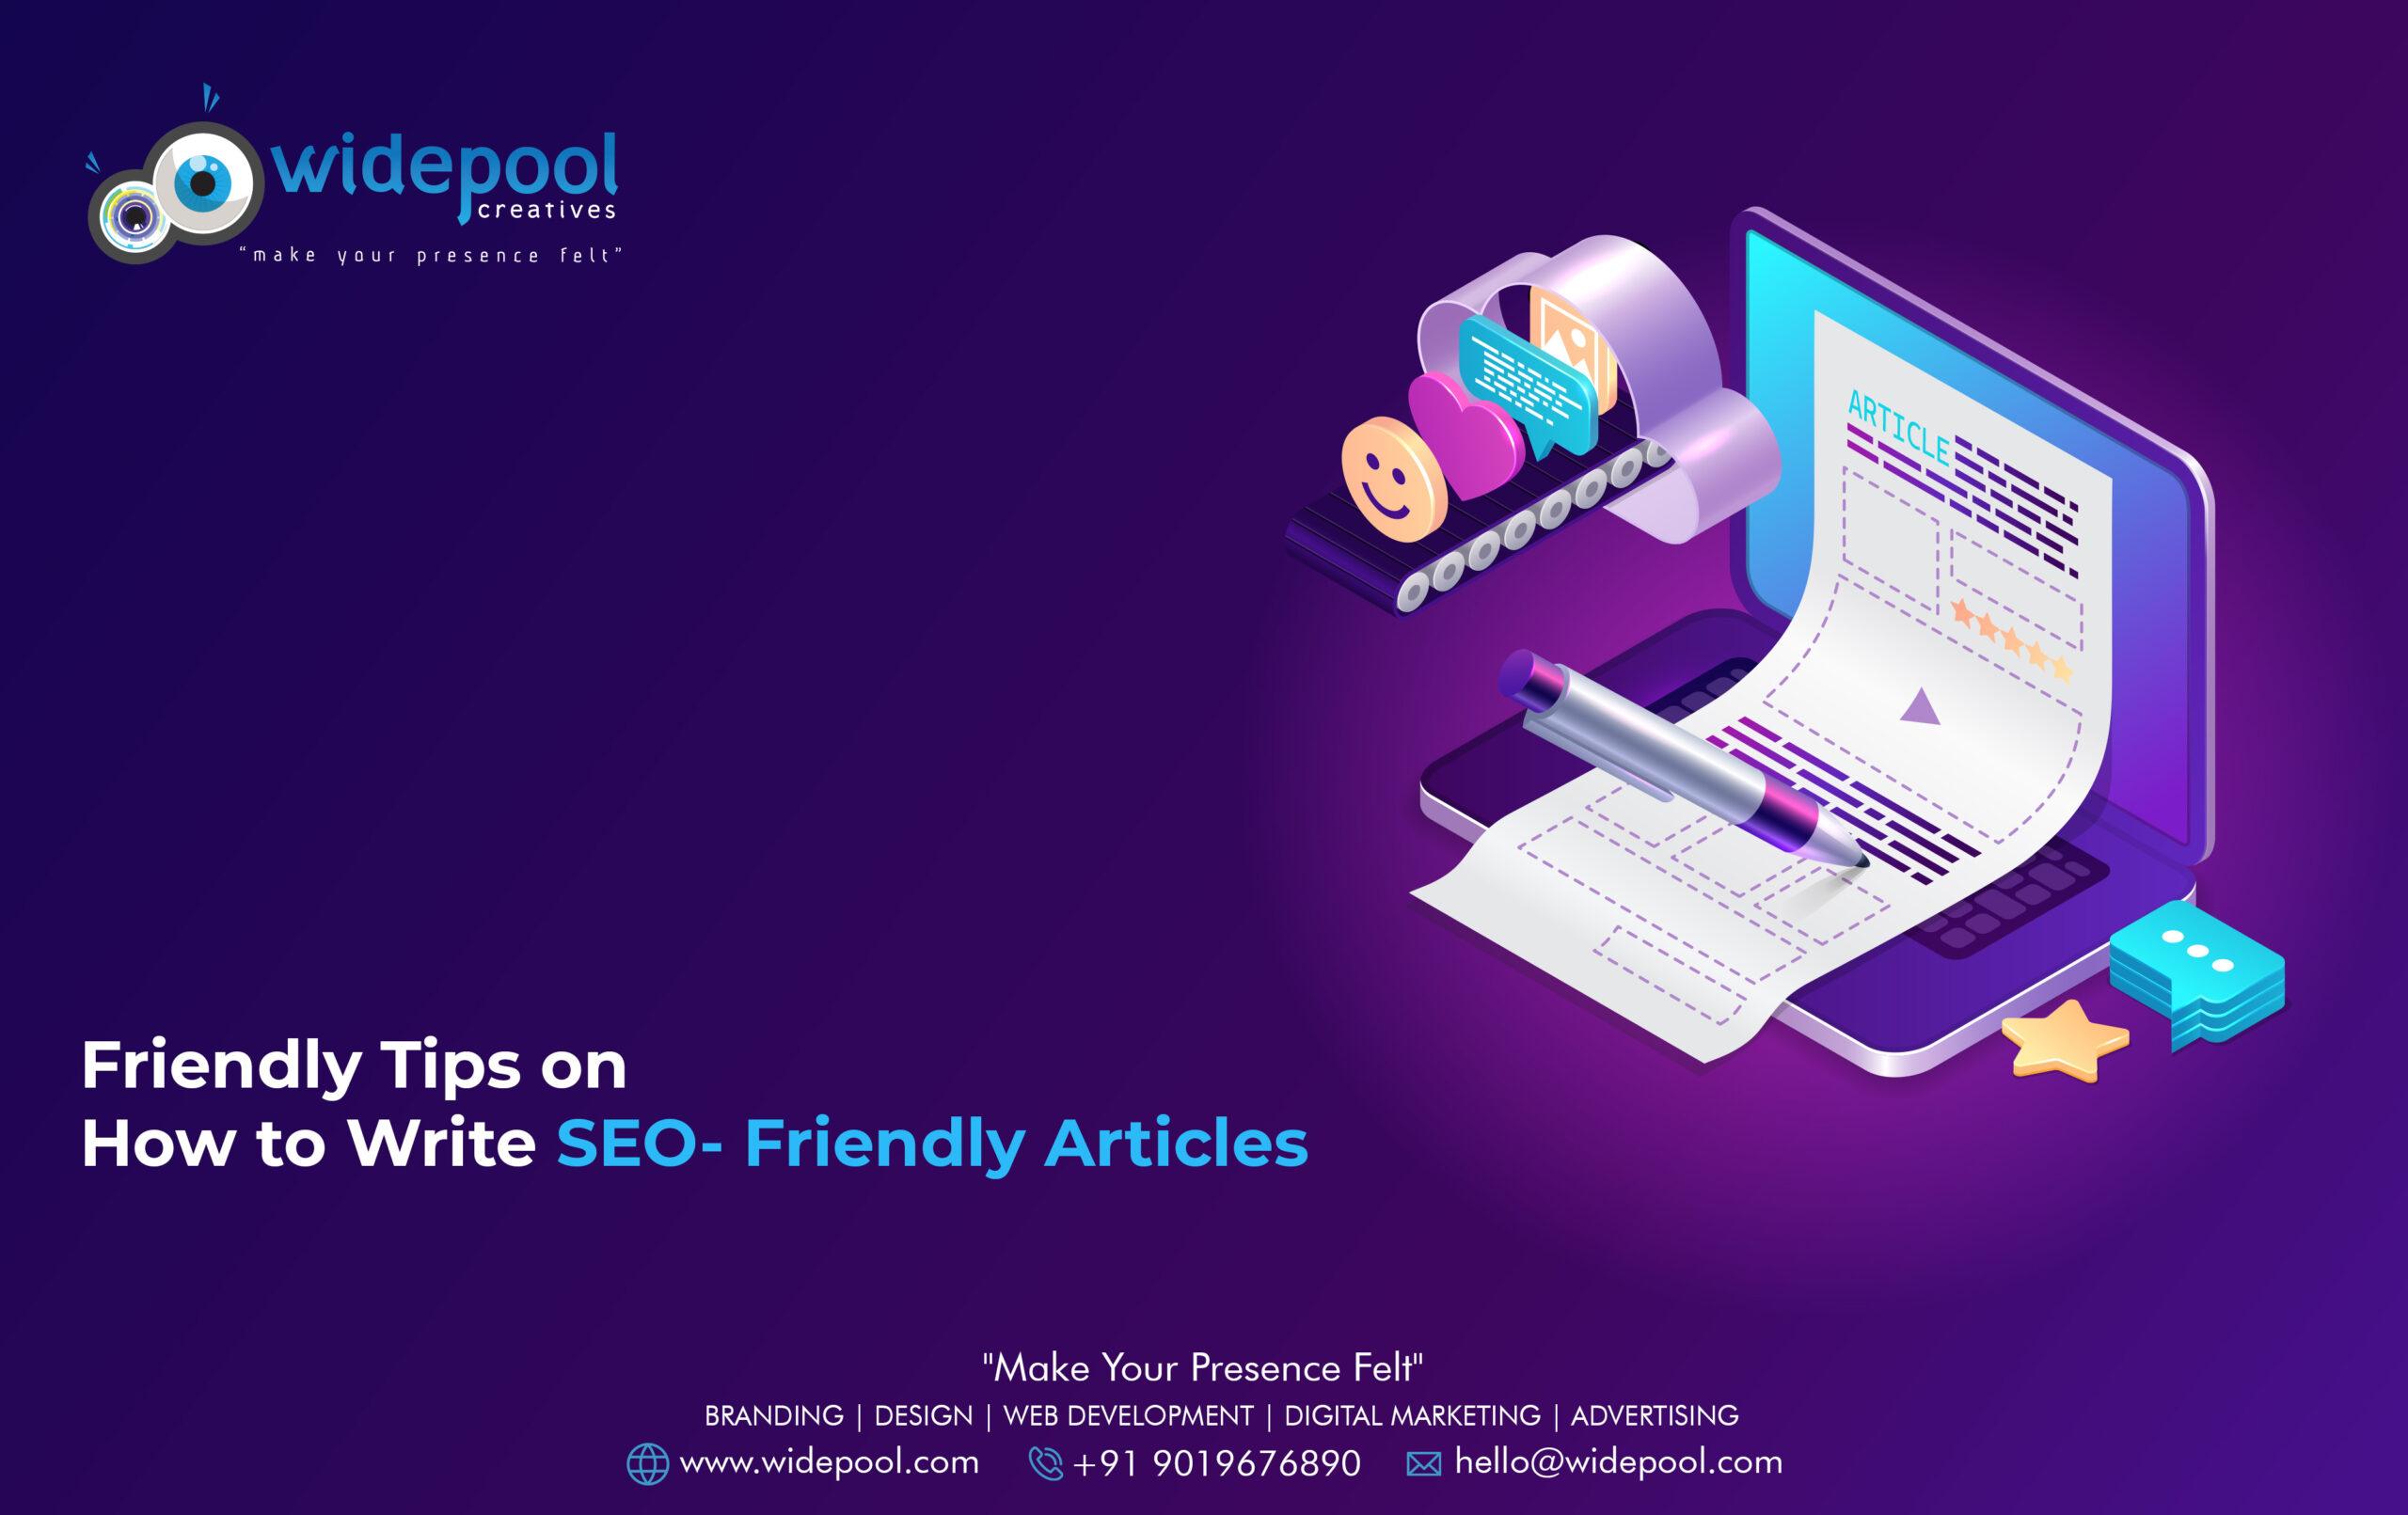 Friendly Tips on How to Write SEO-Friendly Articles